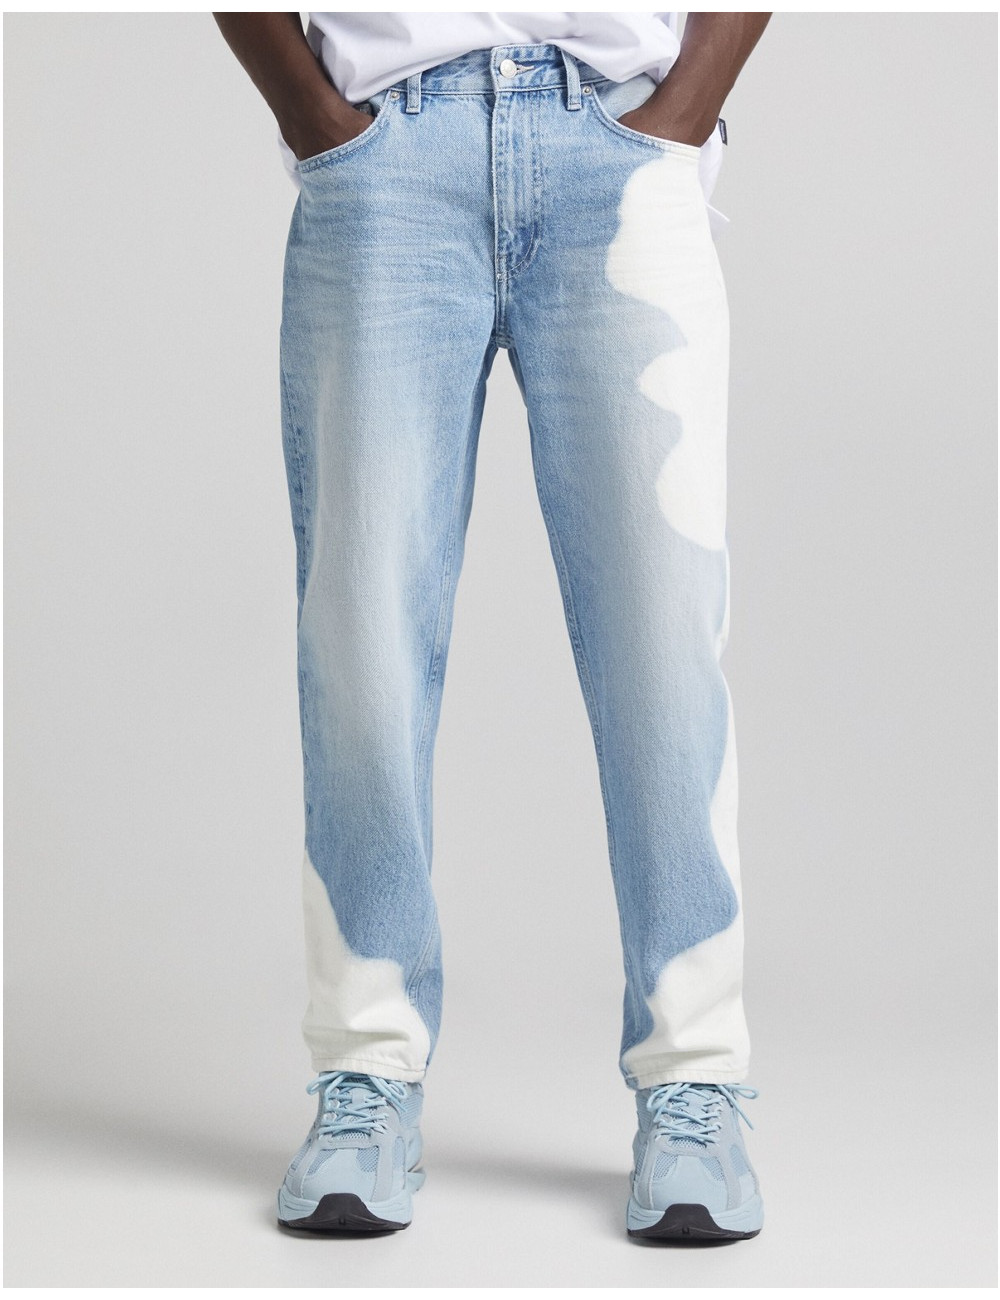 Bershka 90s fit jeans with...